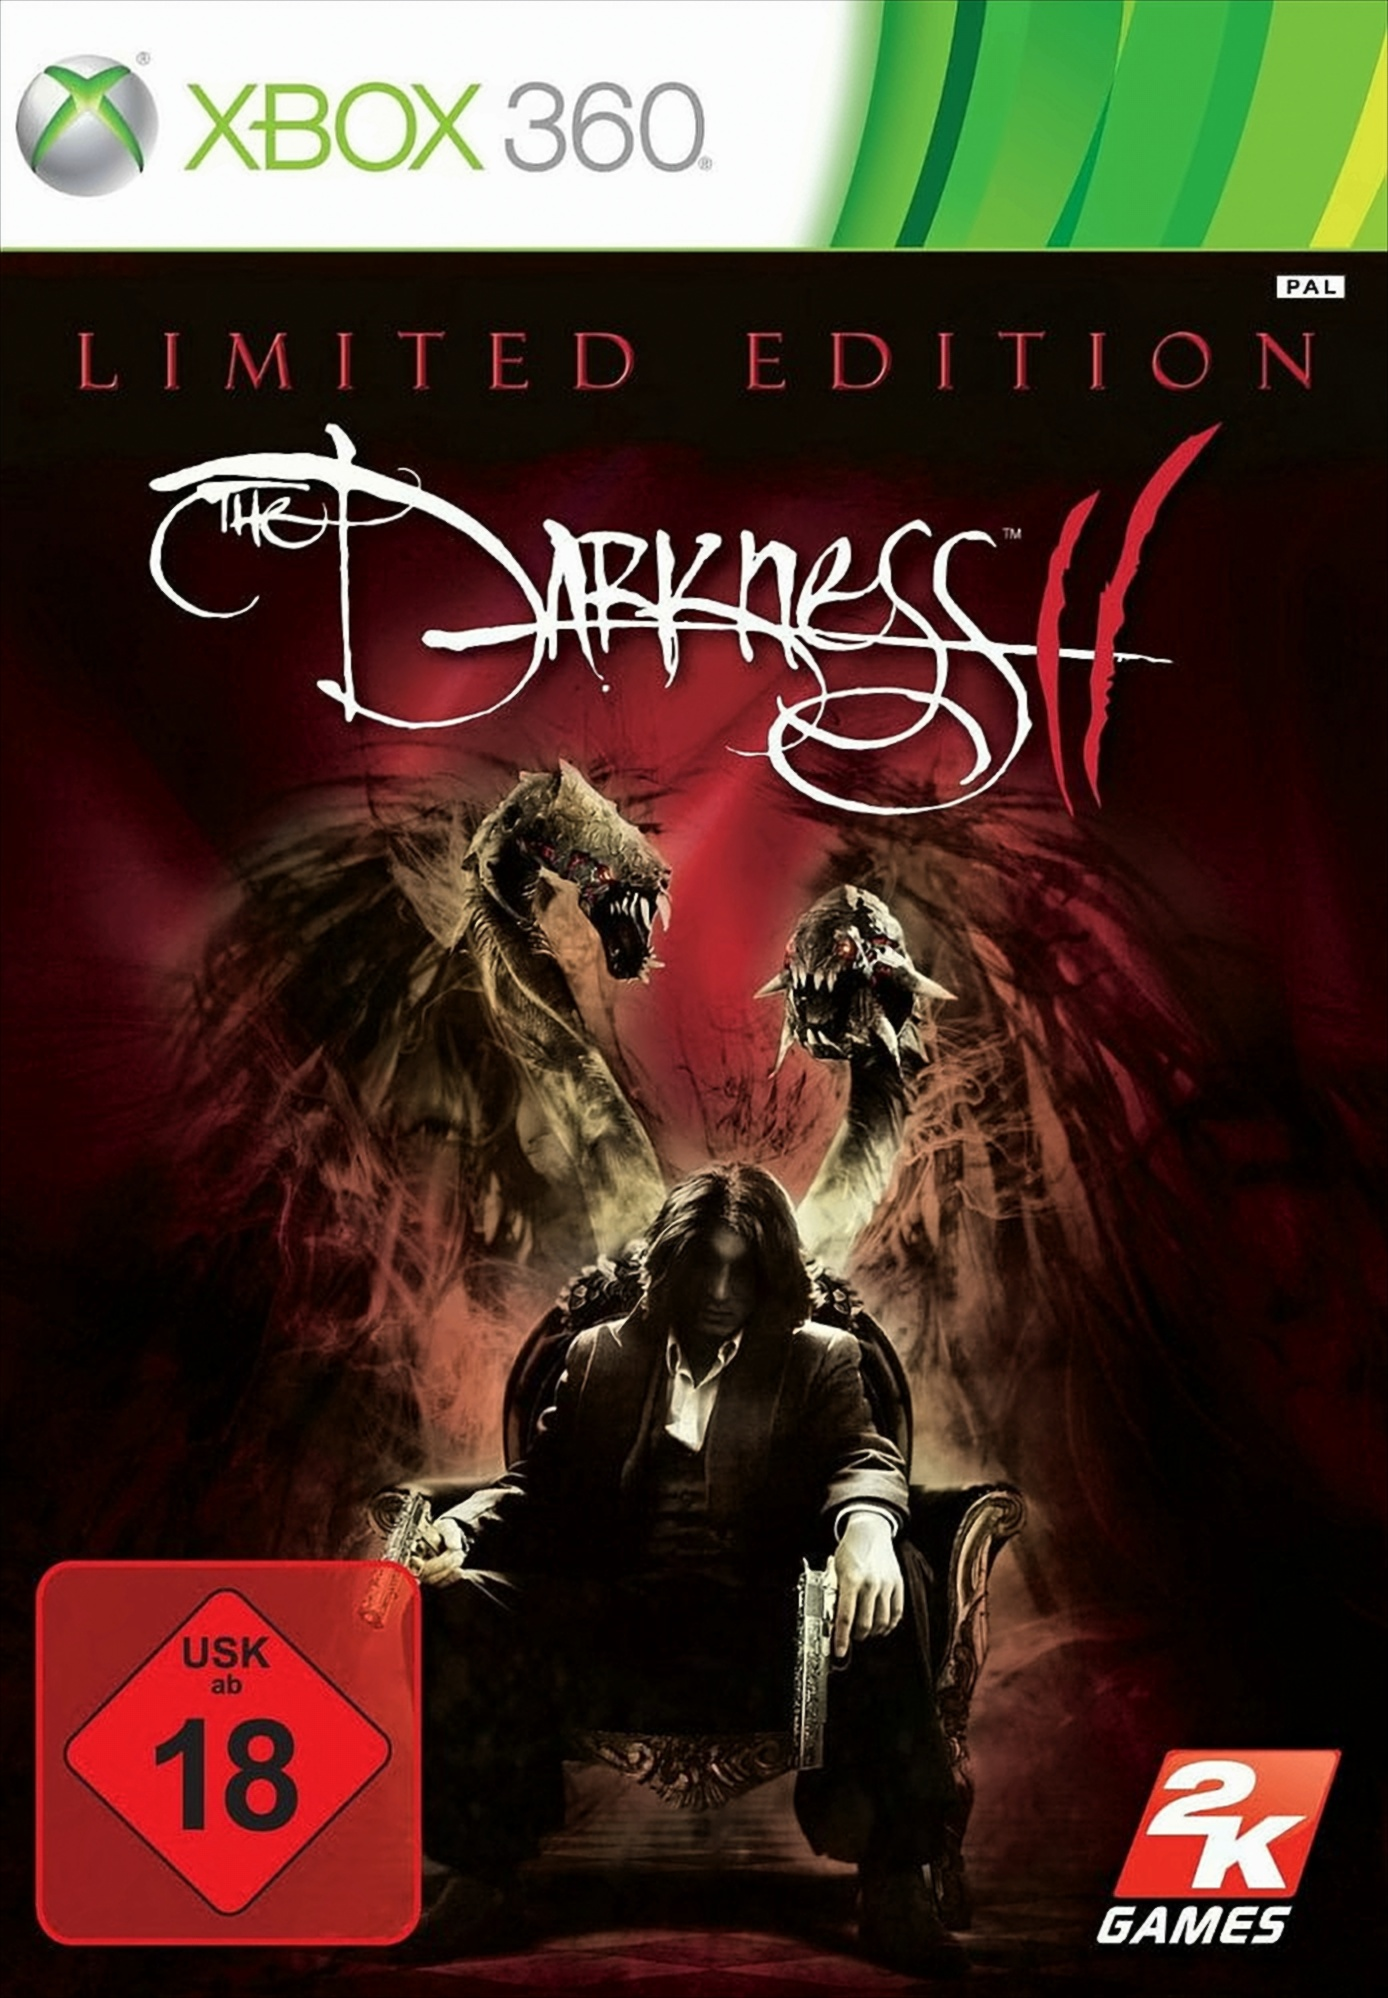 Edition Darkness II - Limited The [Xbox - 360]